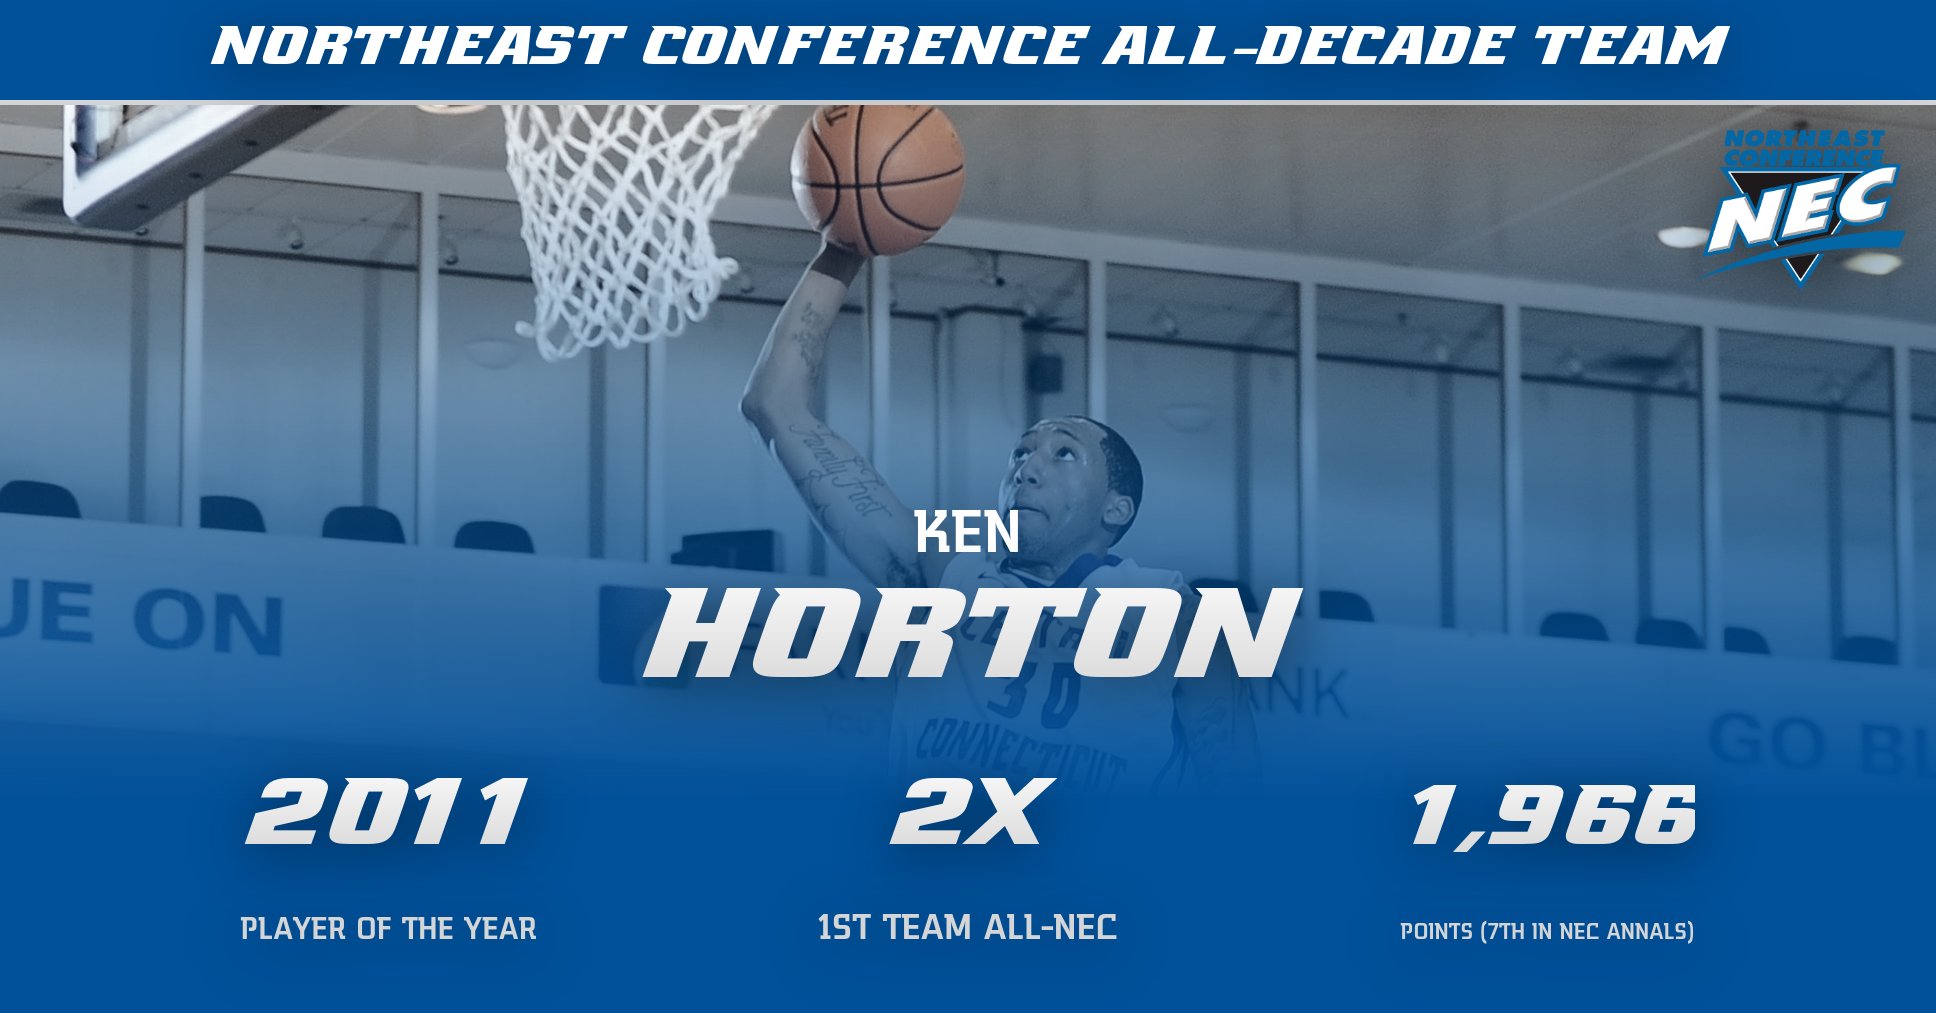 Ken Horton Named to Northeast Conference All-Decade Team